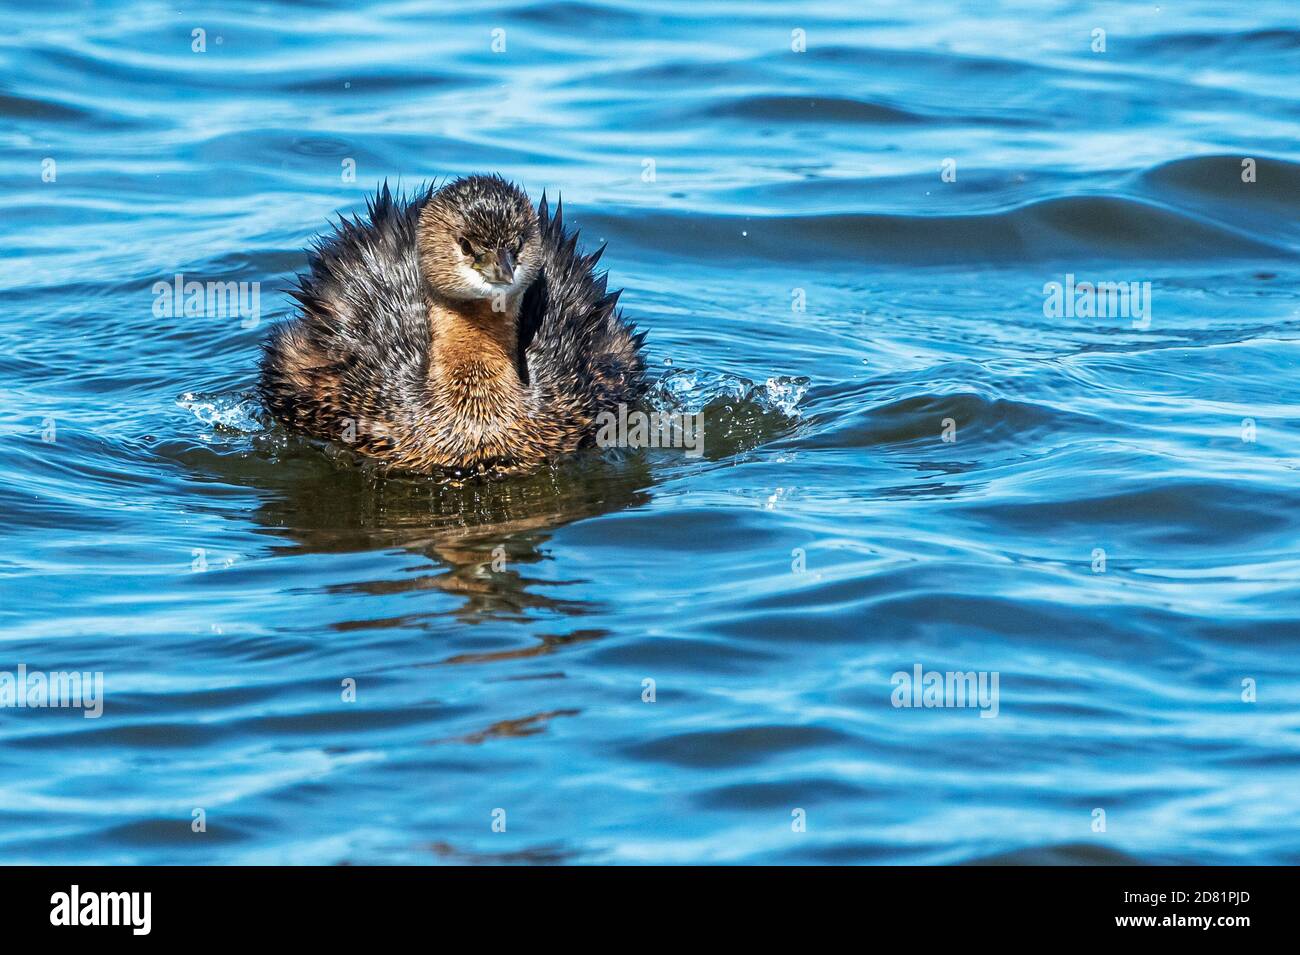 Pied-billed grebe swimming on autumn pond Stock Photo